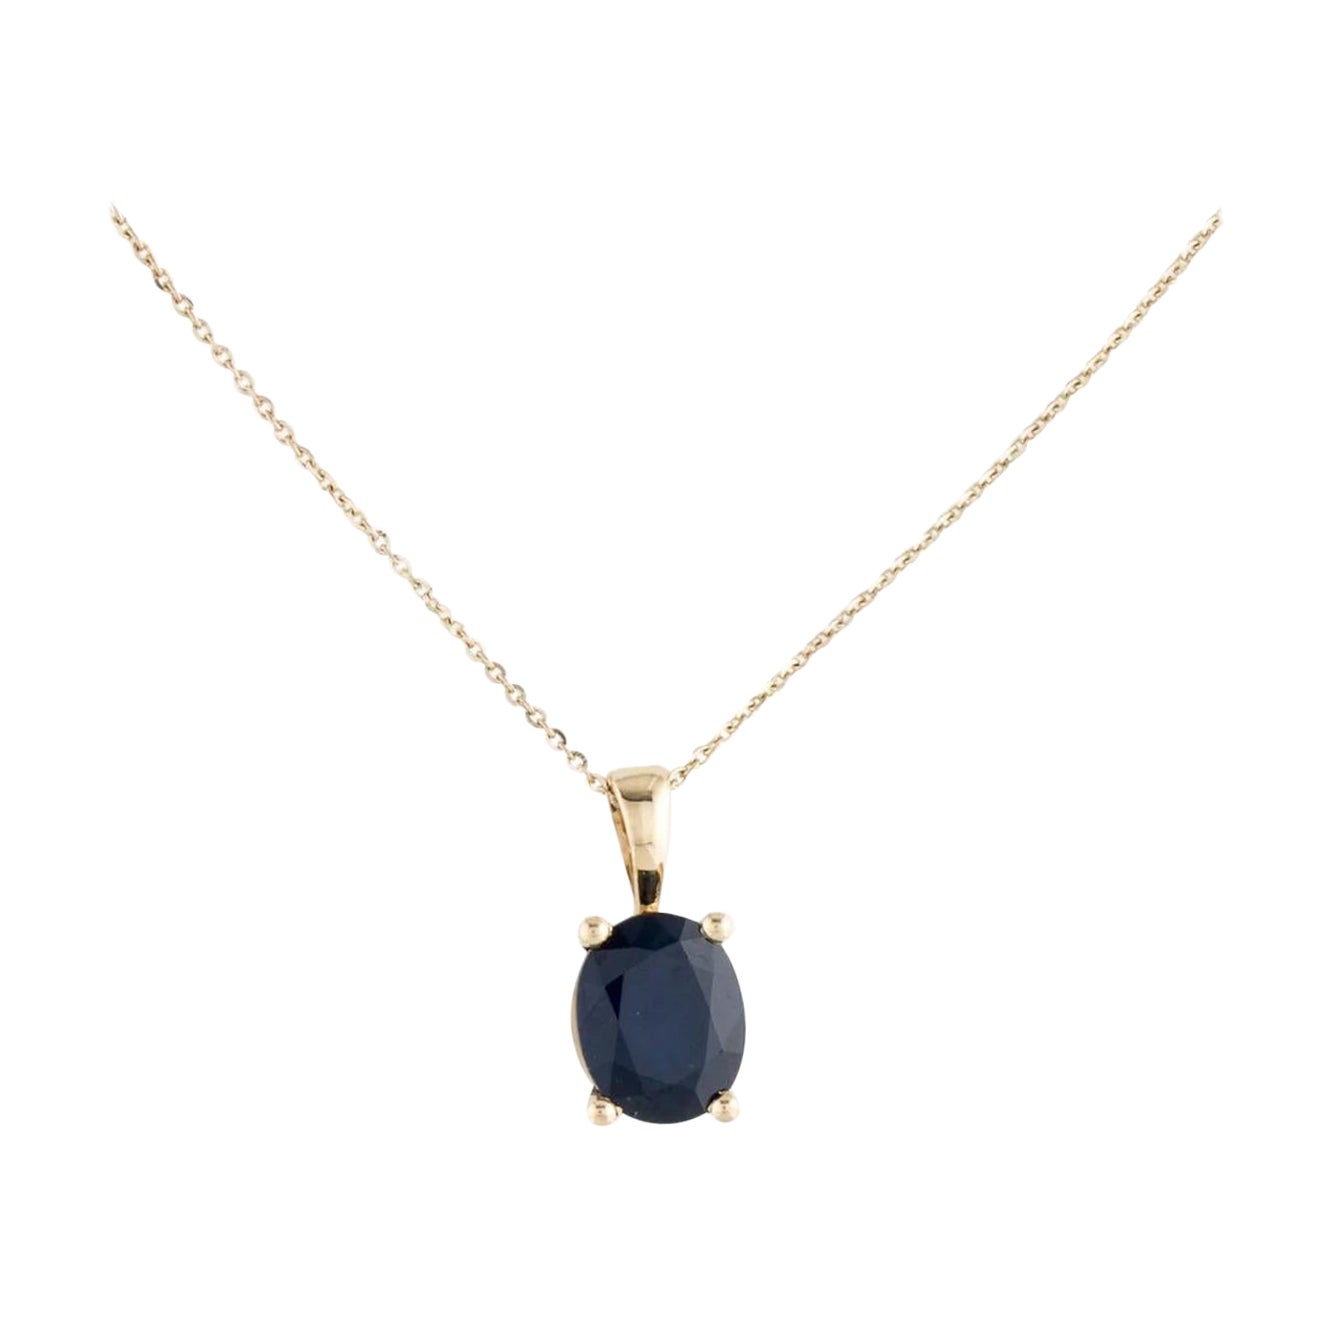 14K 3.61ct Sapphire Pendant Necklace - Timeless Elegance, Statement Jewelry For Sale